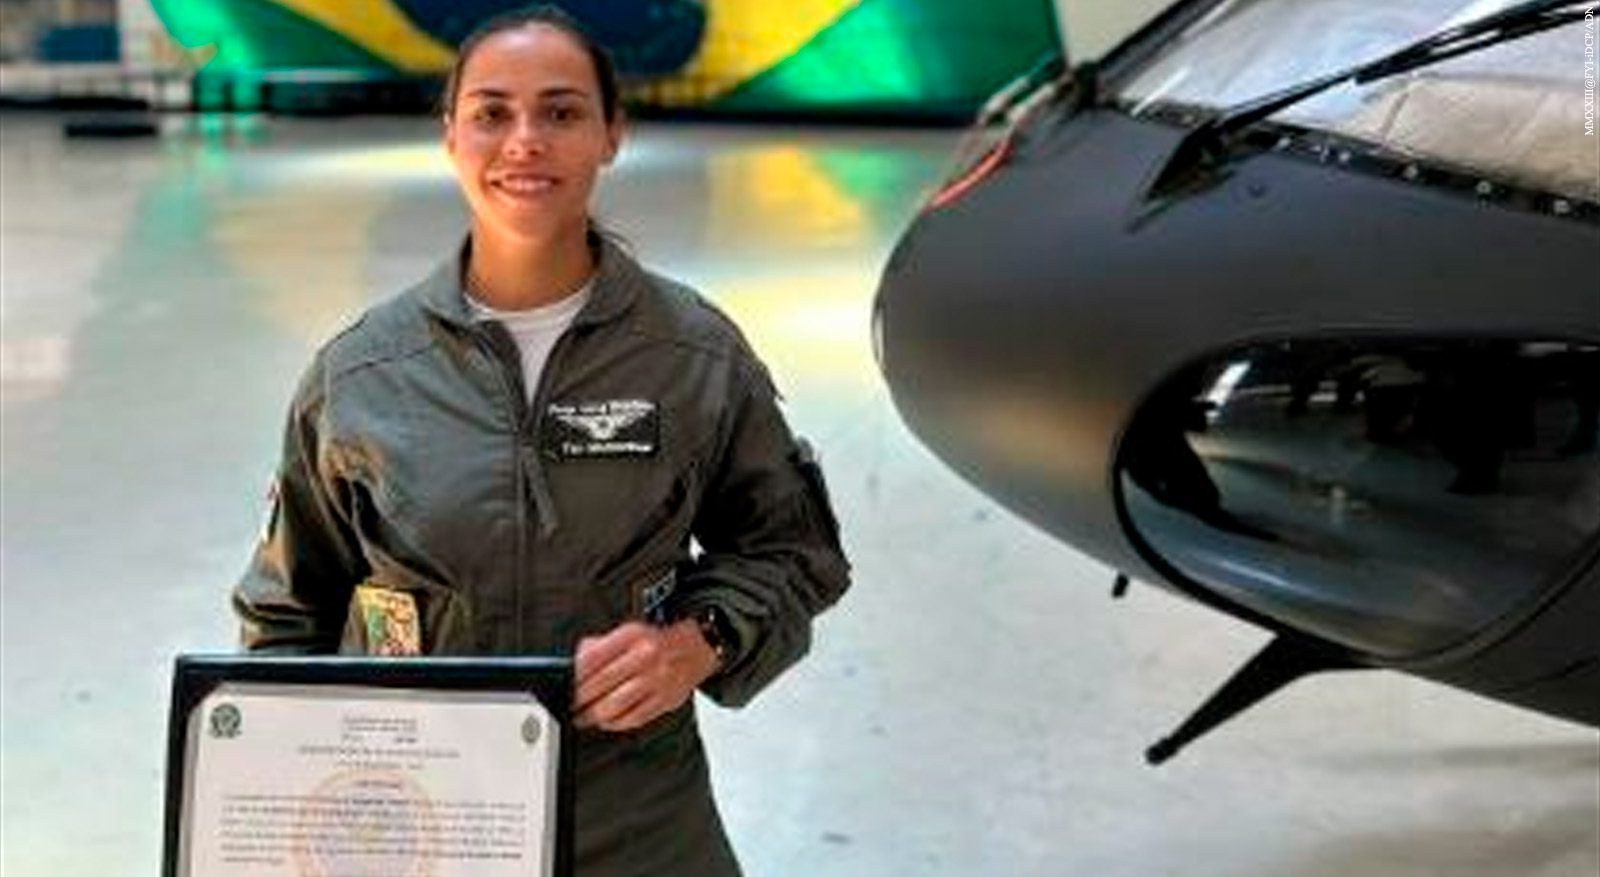 FAB pilot is the first to complete the Brazilian Army's Tactical Piloting Course